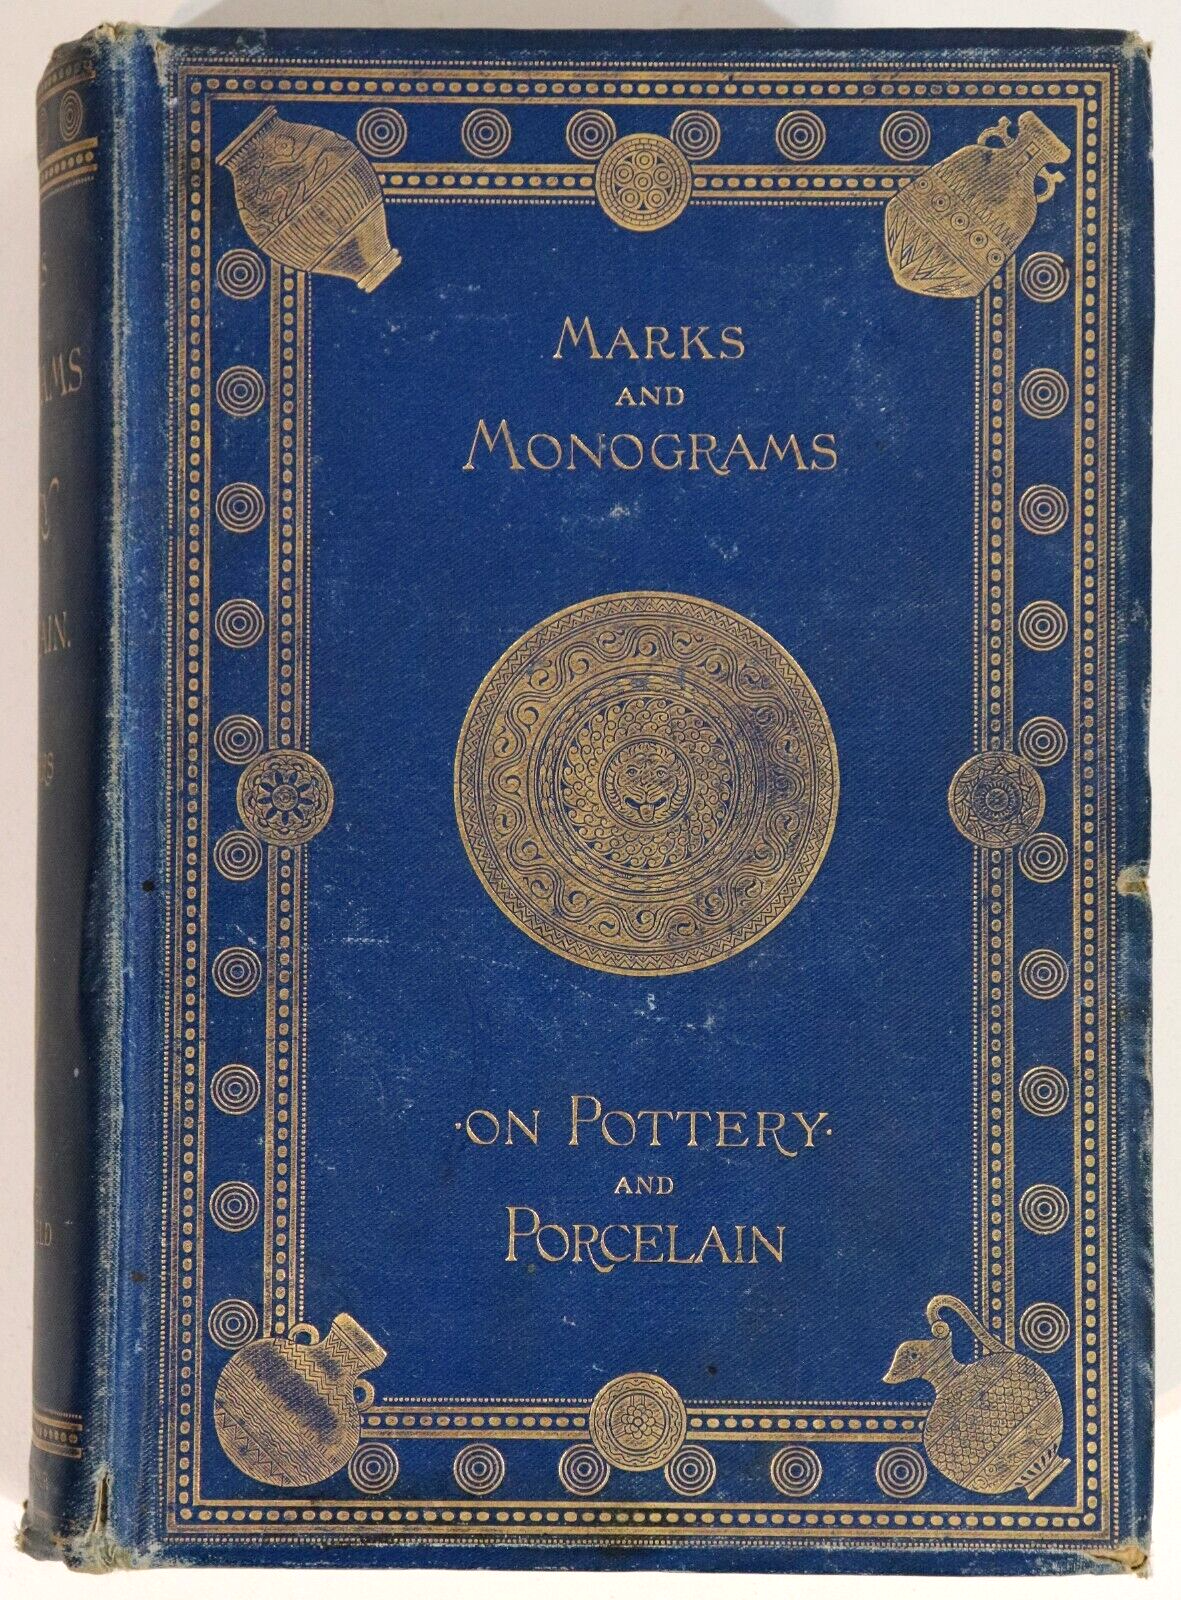 Marks & Monograms On Pottery & Porcelain - 1903 - Antique Reference Book